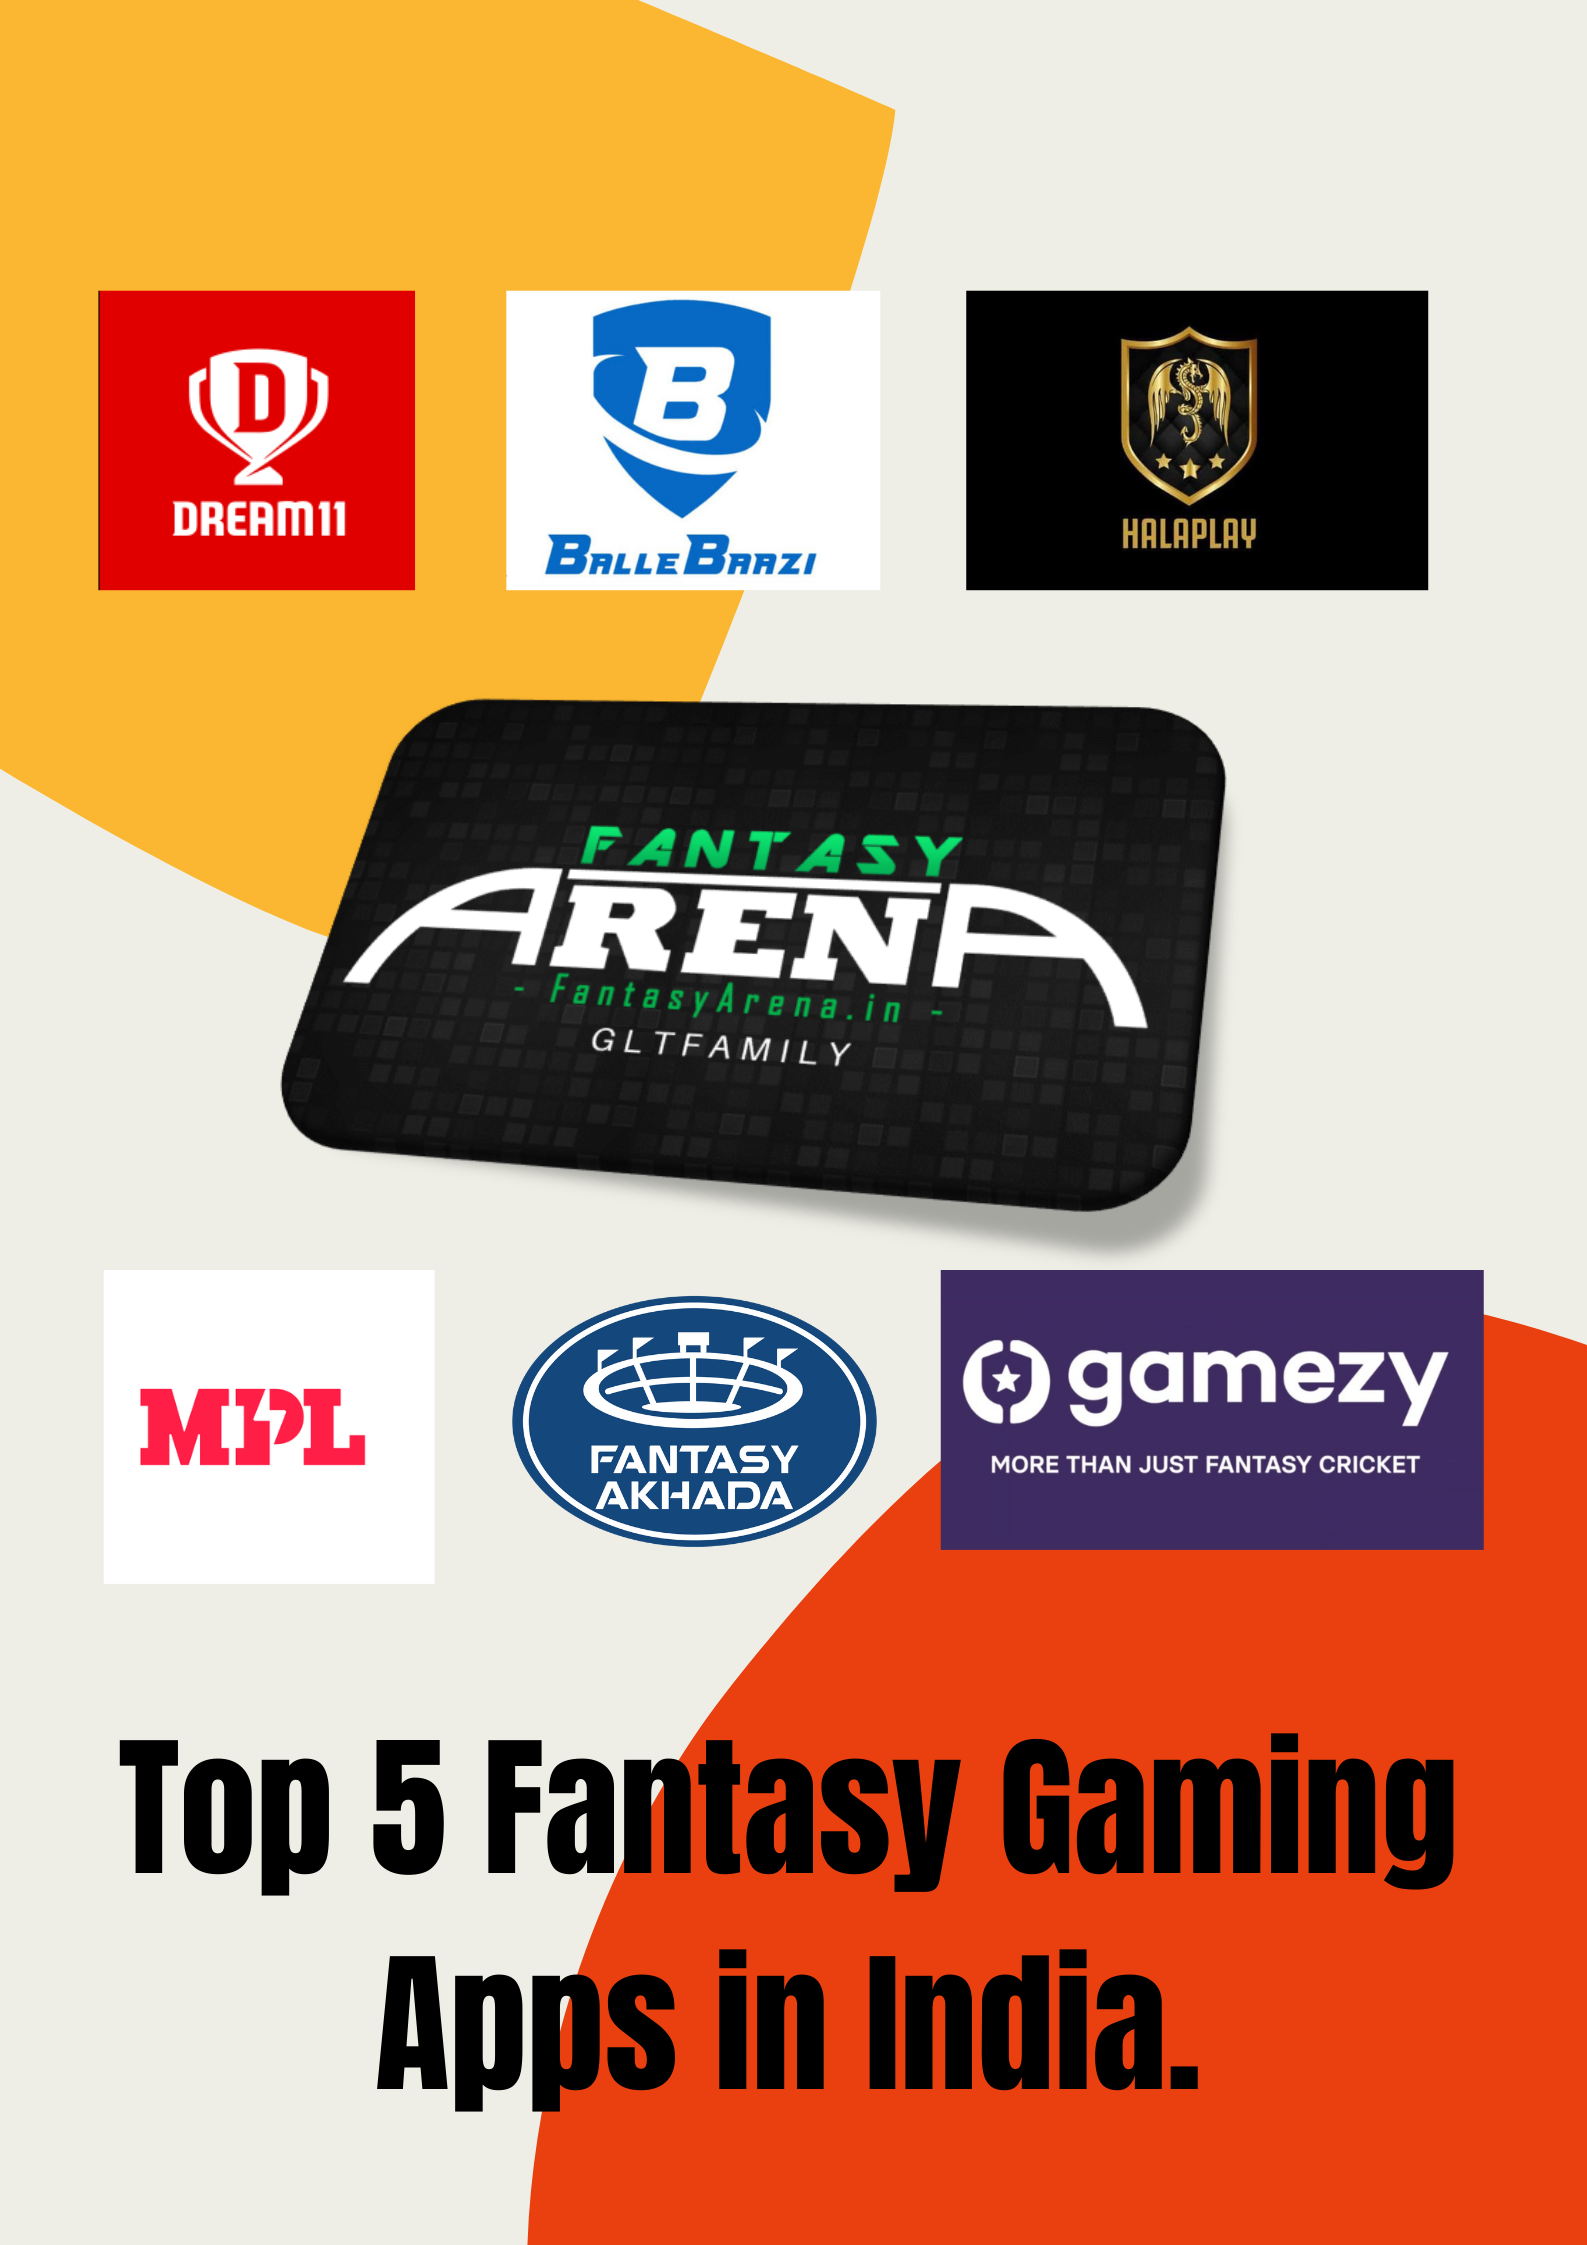 Top 5 Fantasy Gaming Apps In India That You Should know.